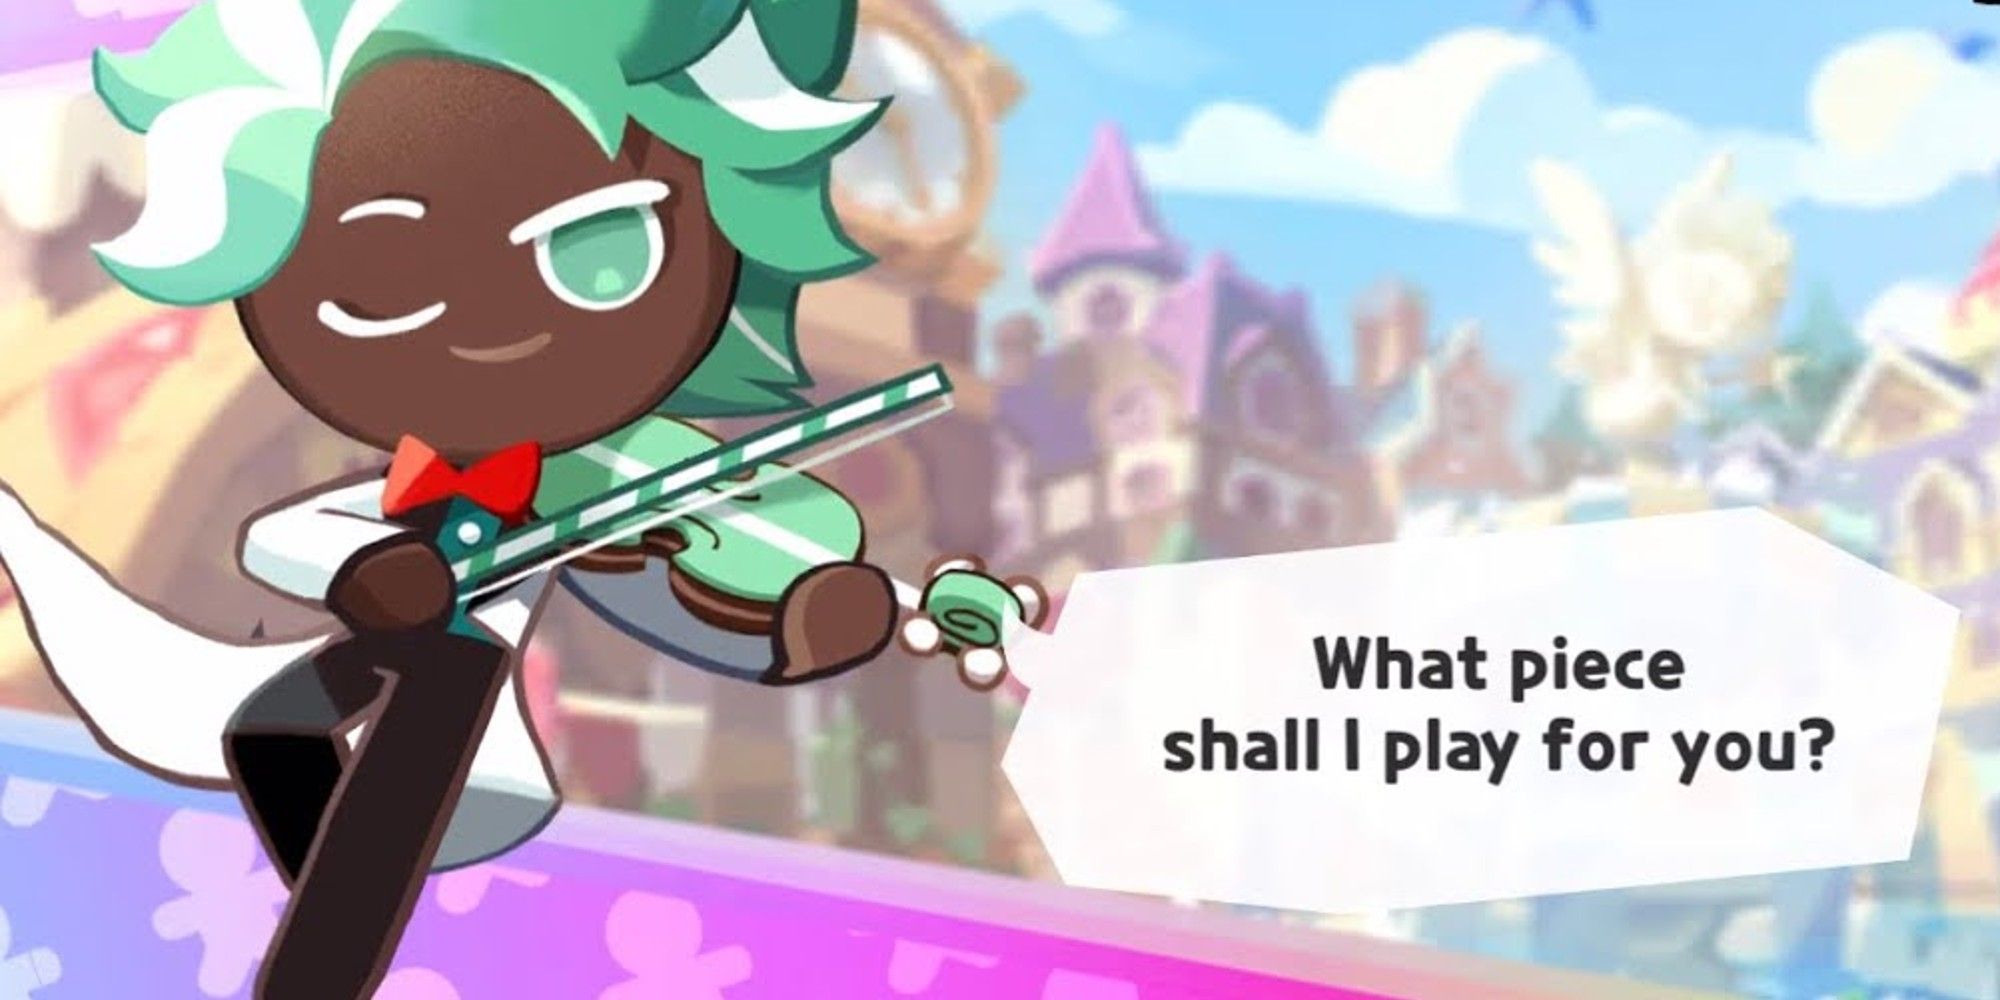 Mint Choco Cookie offers to play music for you